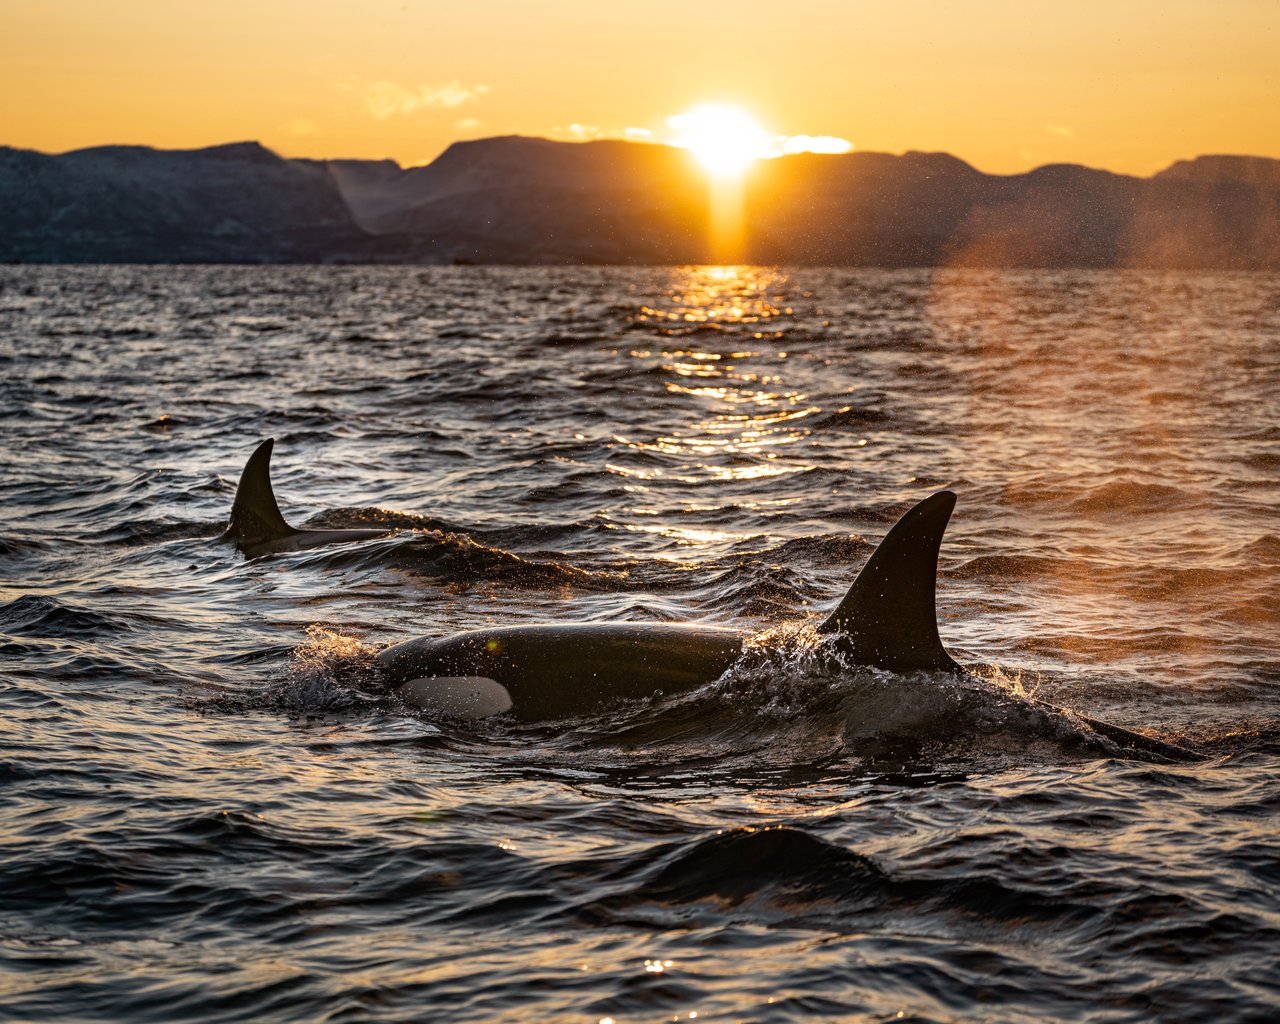 Orcas swimming in the wild